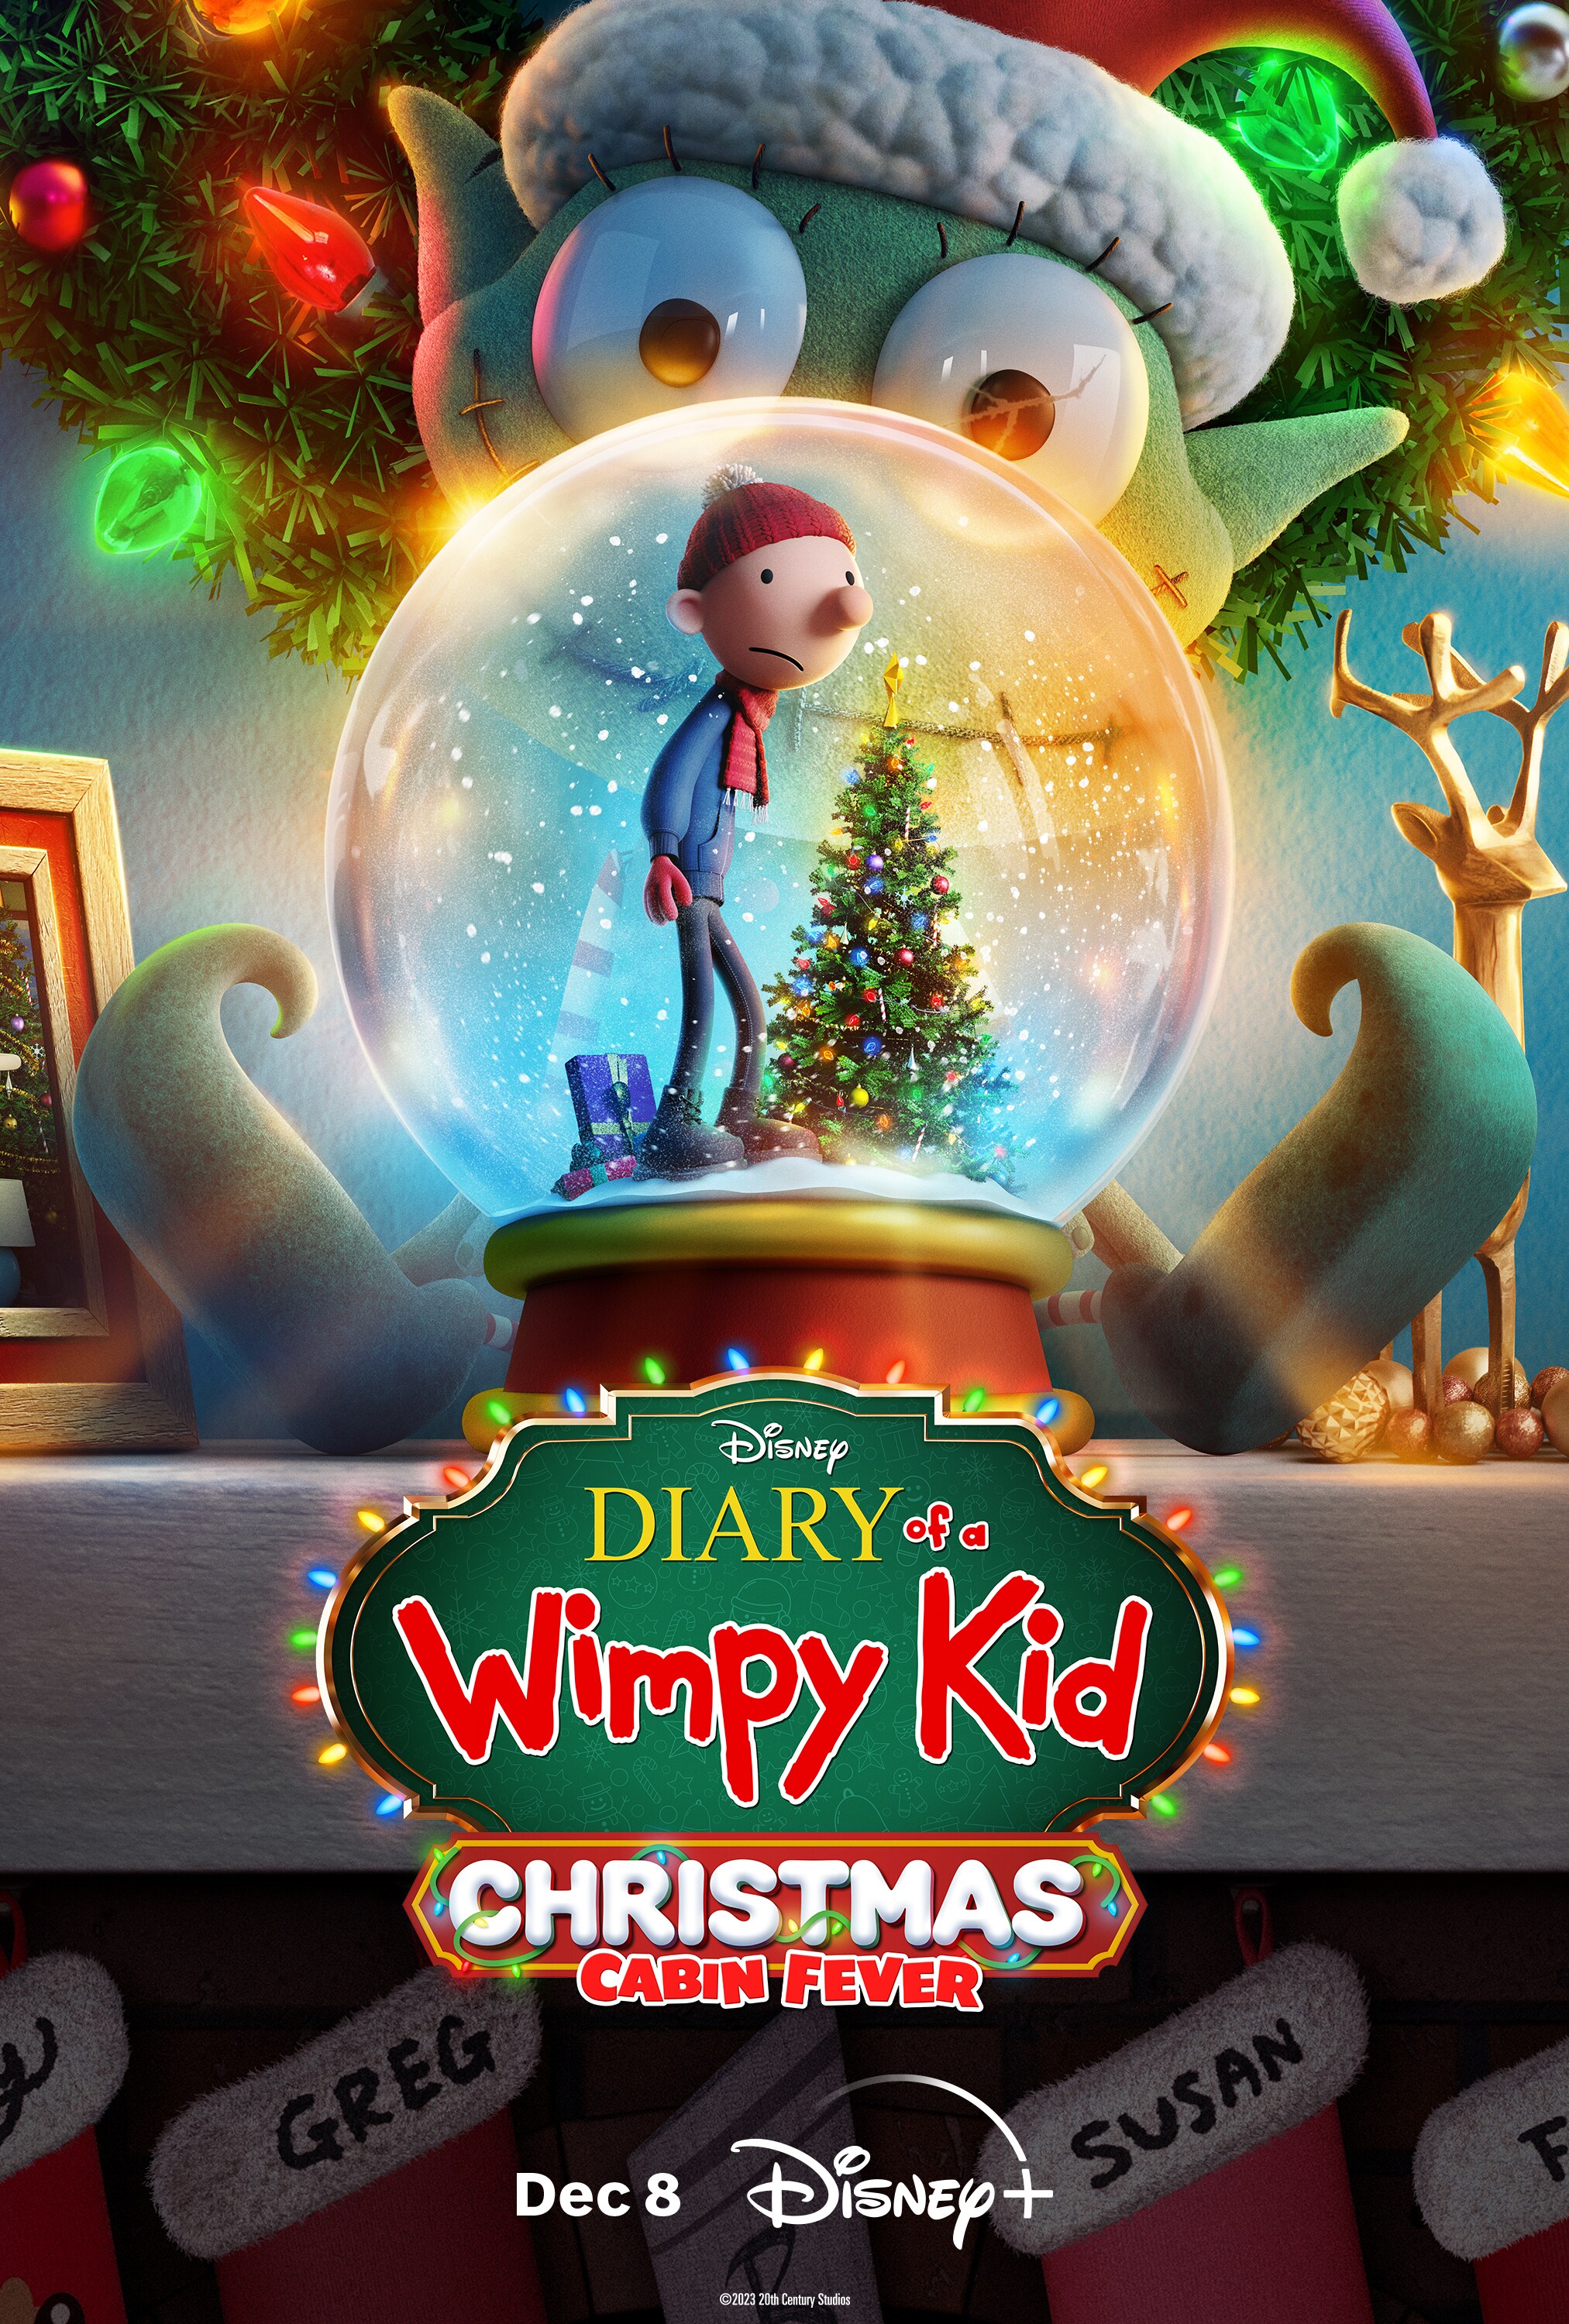 New 'Diary of a Wimpy Kid' Christmas Movie Now on Disney Plus